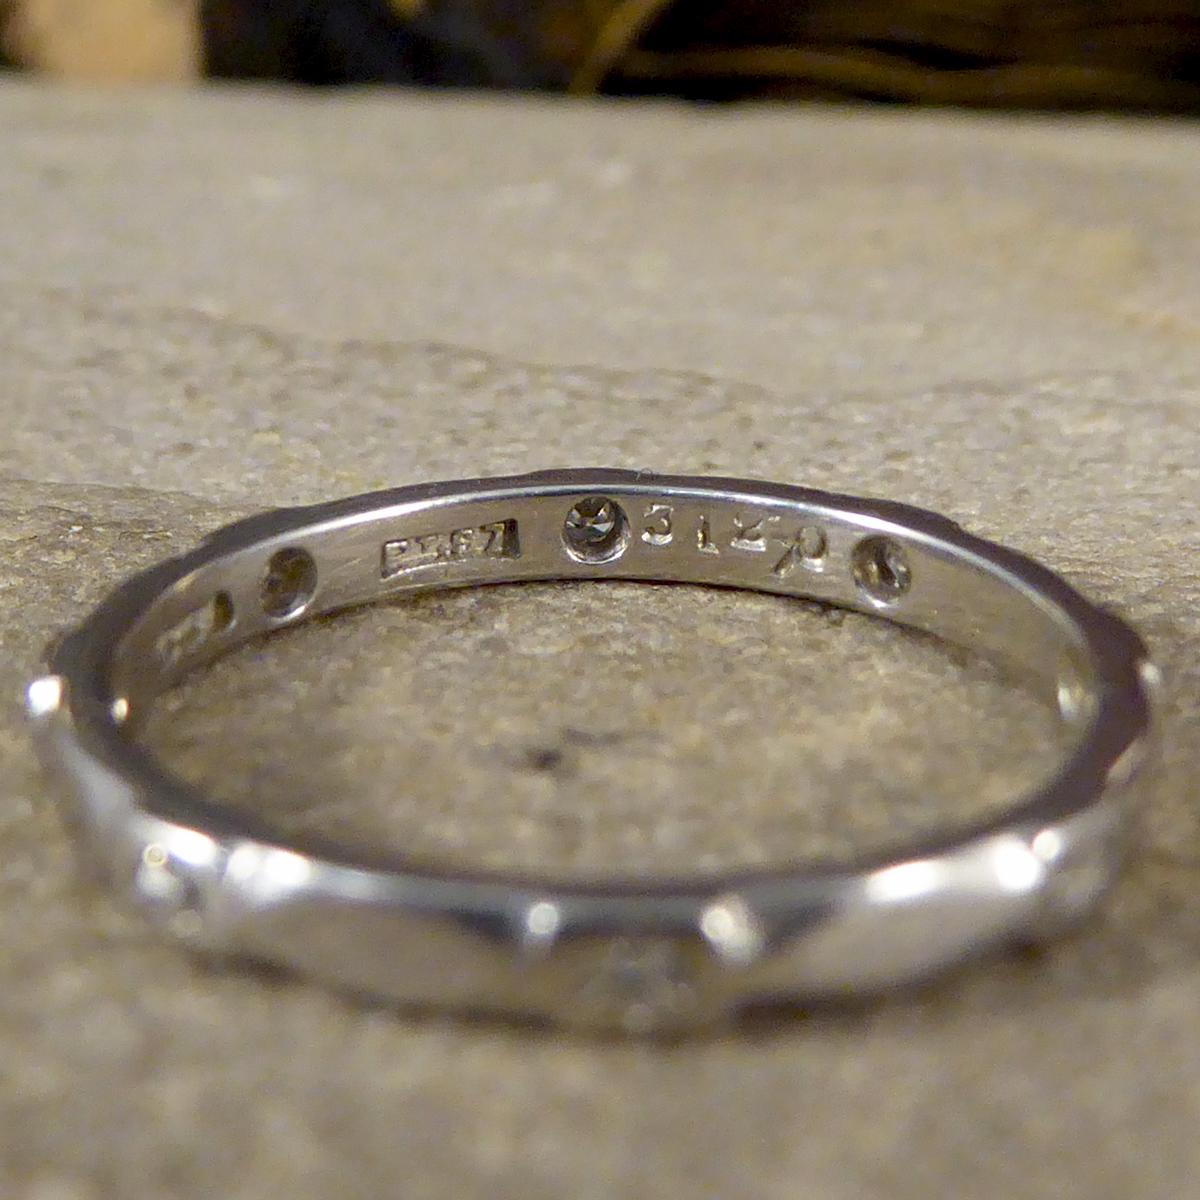 Looking for the perfect fine wedding band? This gorgeous Art Deco band has been made fully from Platinum and shows detailing the full way round. Due to this antique ring being fine it is able to sit comfortably next to or slightly underneath an